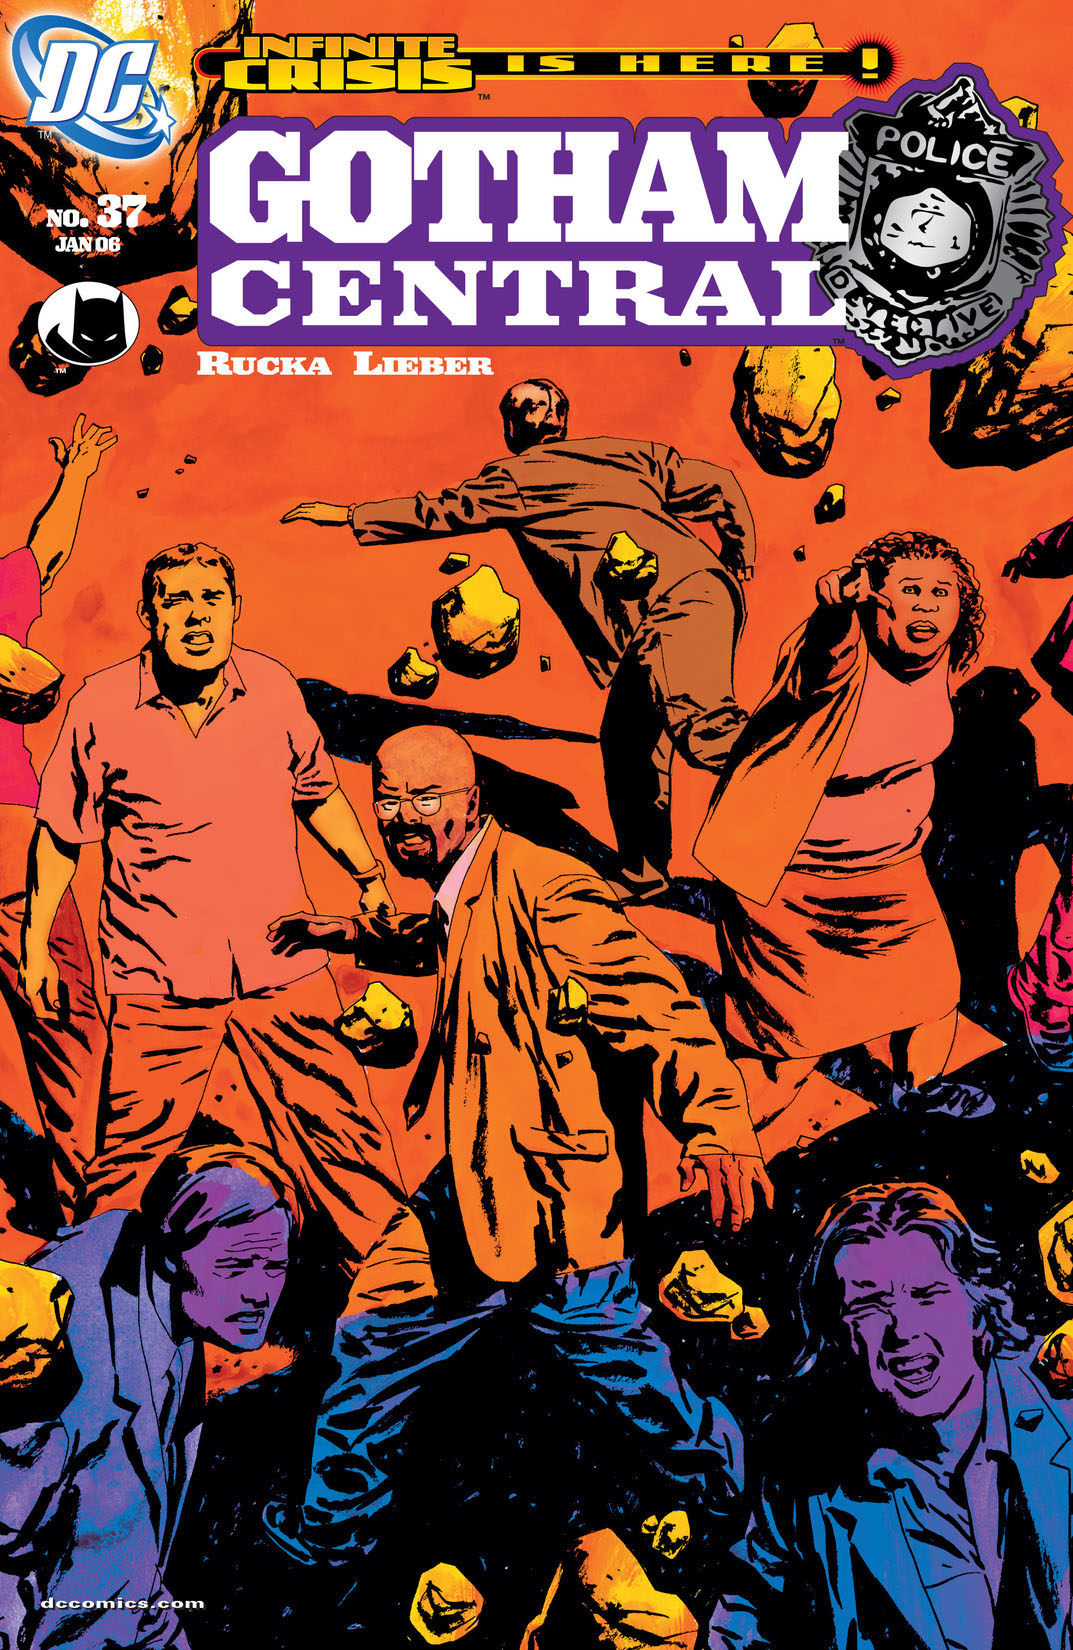 Gotham Central #37 preview images